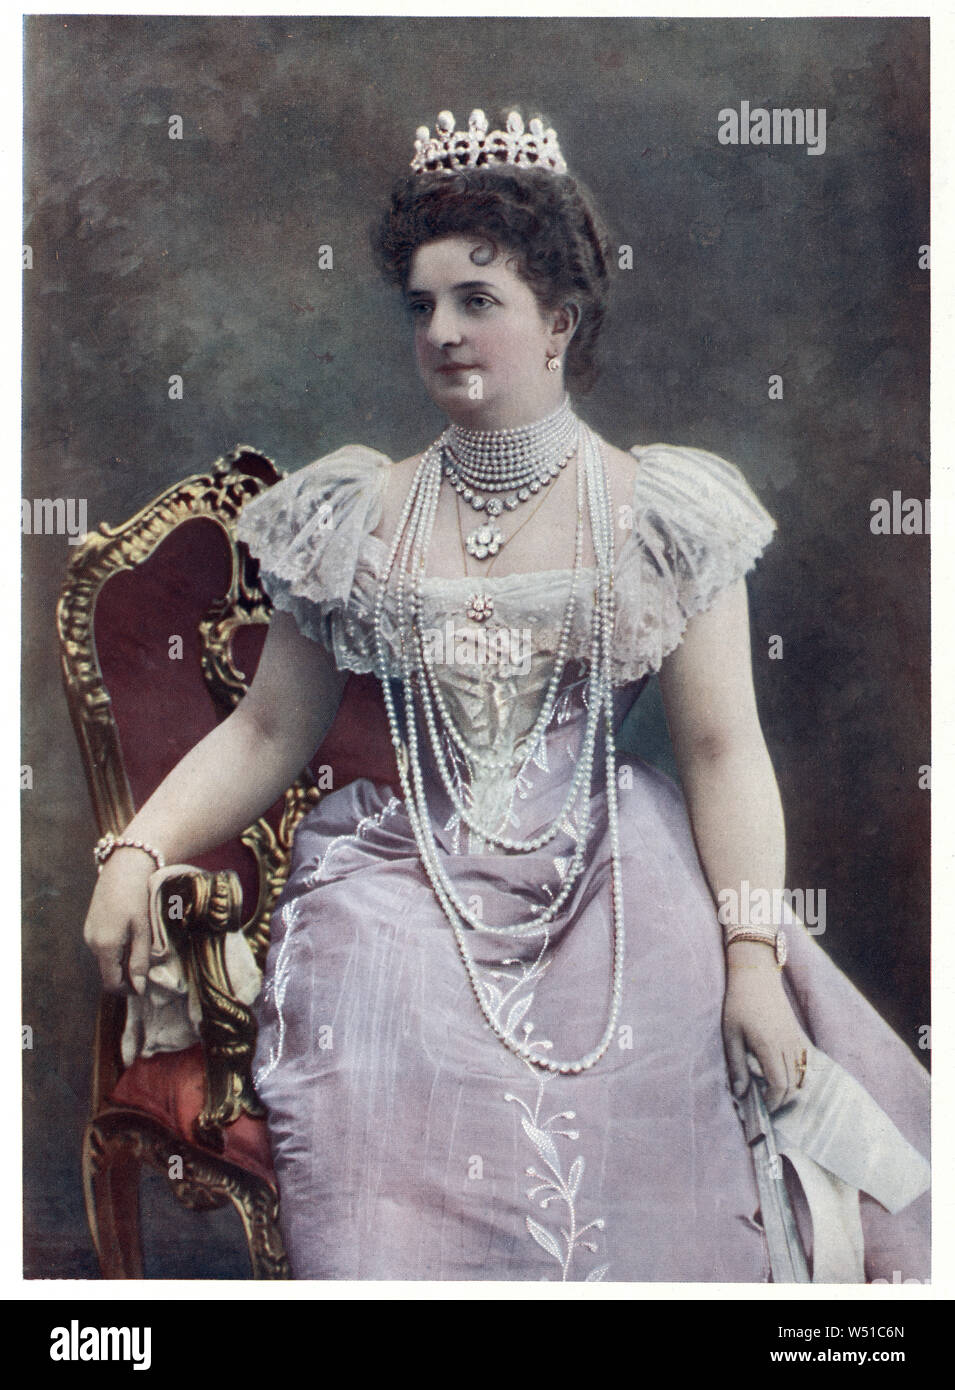 Margherita of Savoy (Margherita Maria Teresa Giovanna; 20 November 1851 – 4 January 1926) was the Queen consort of the Kingdom of Italy by marriage to Umberto I. Stock Photo